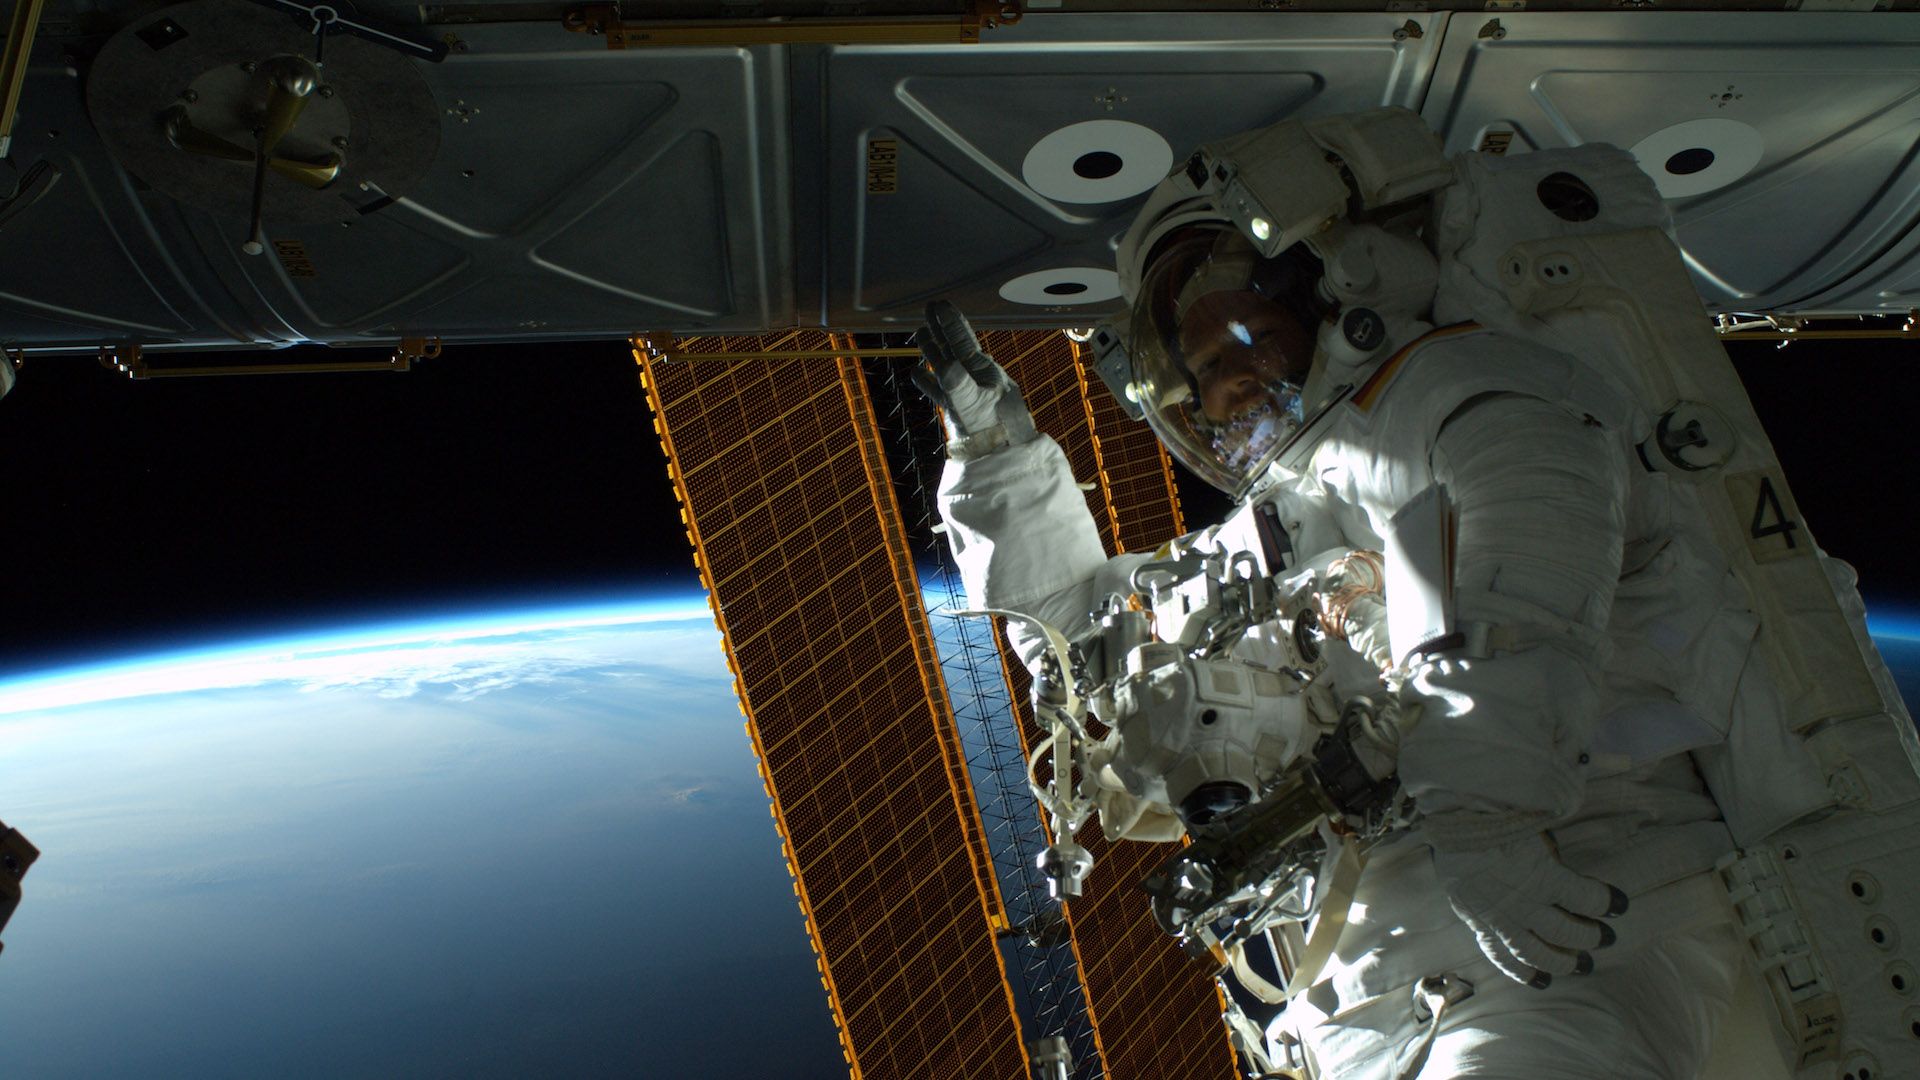 Astronaut conducting a spacewalk outside the space station.